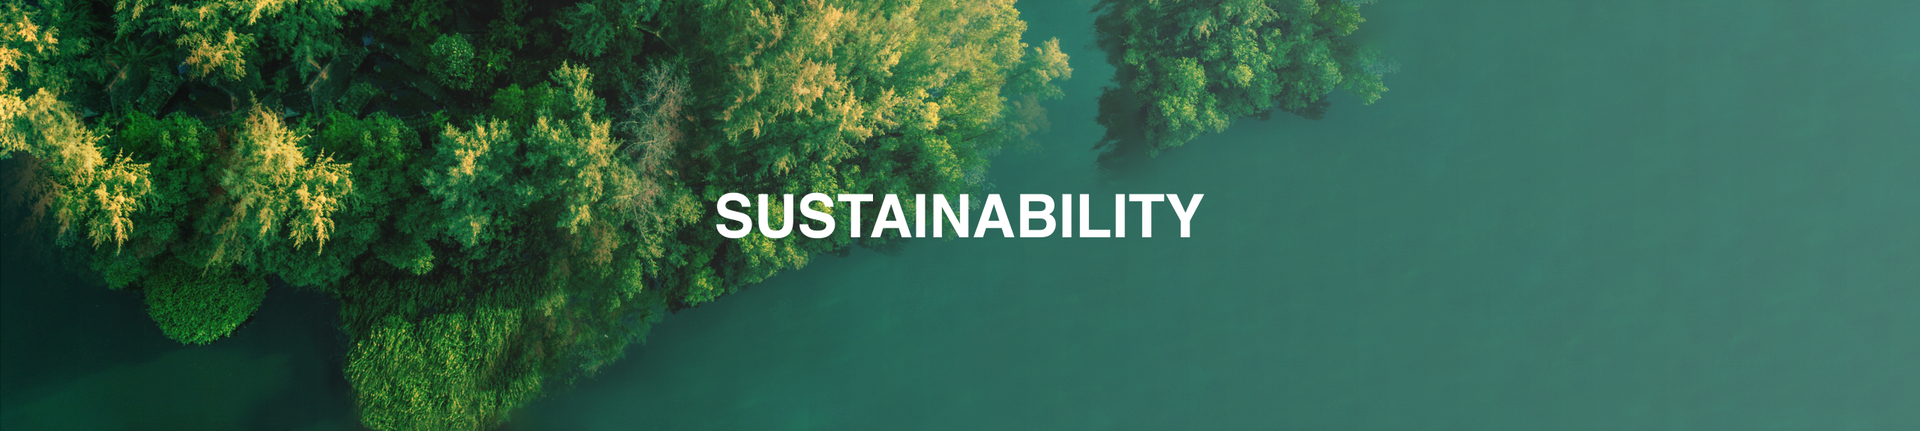 Sustainability header and title